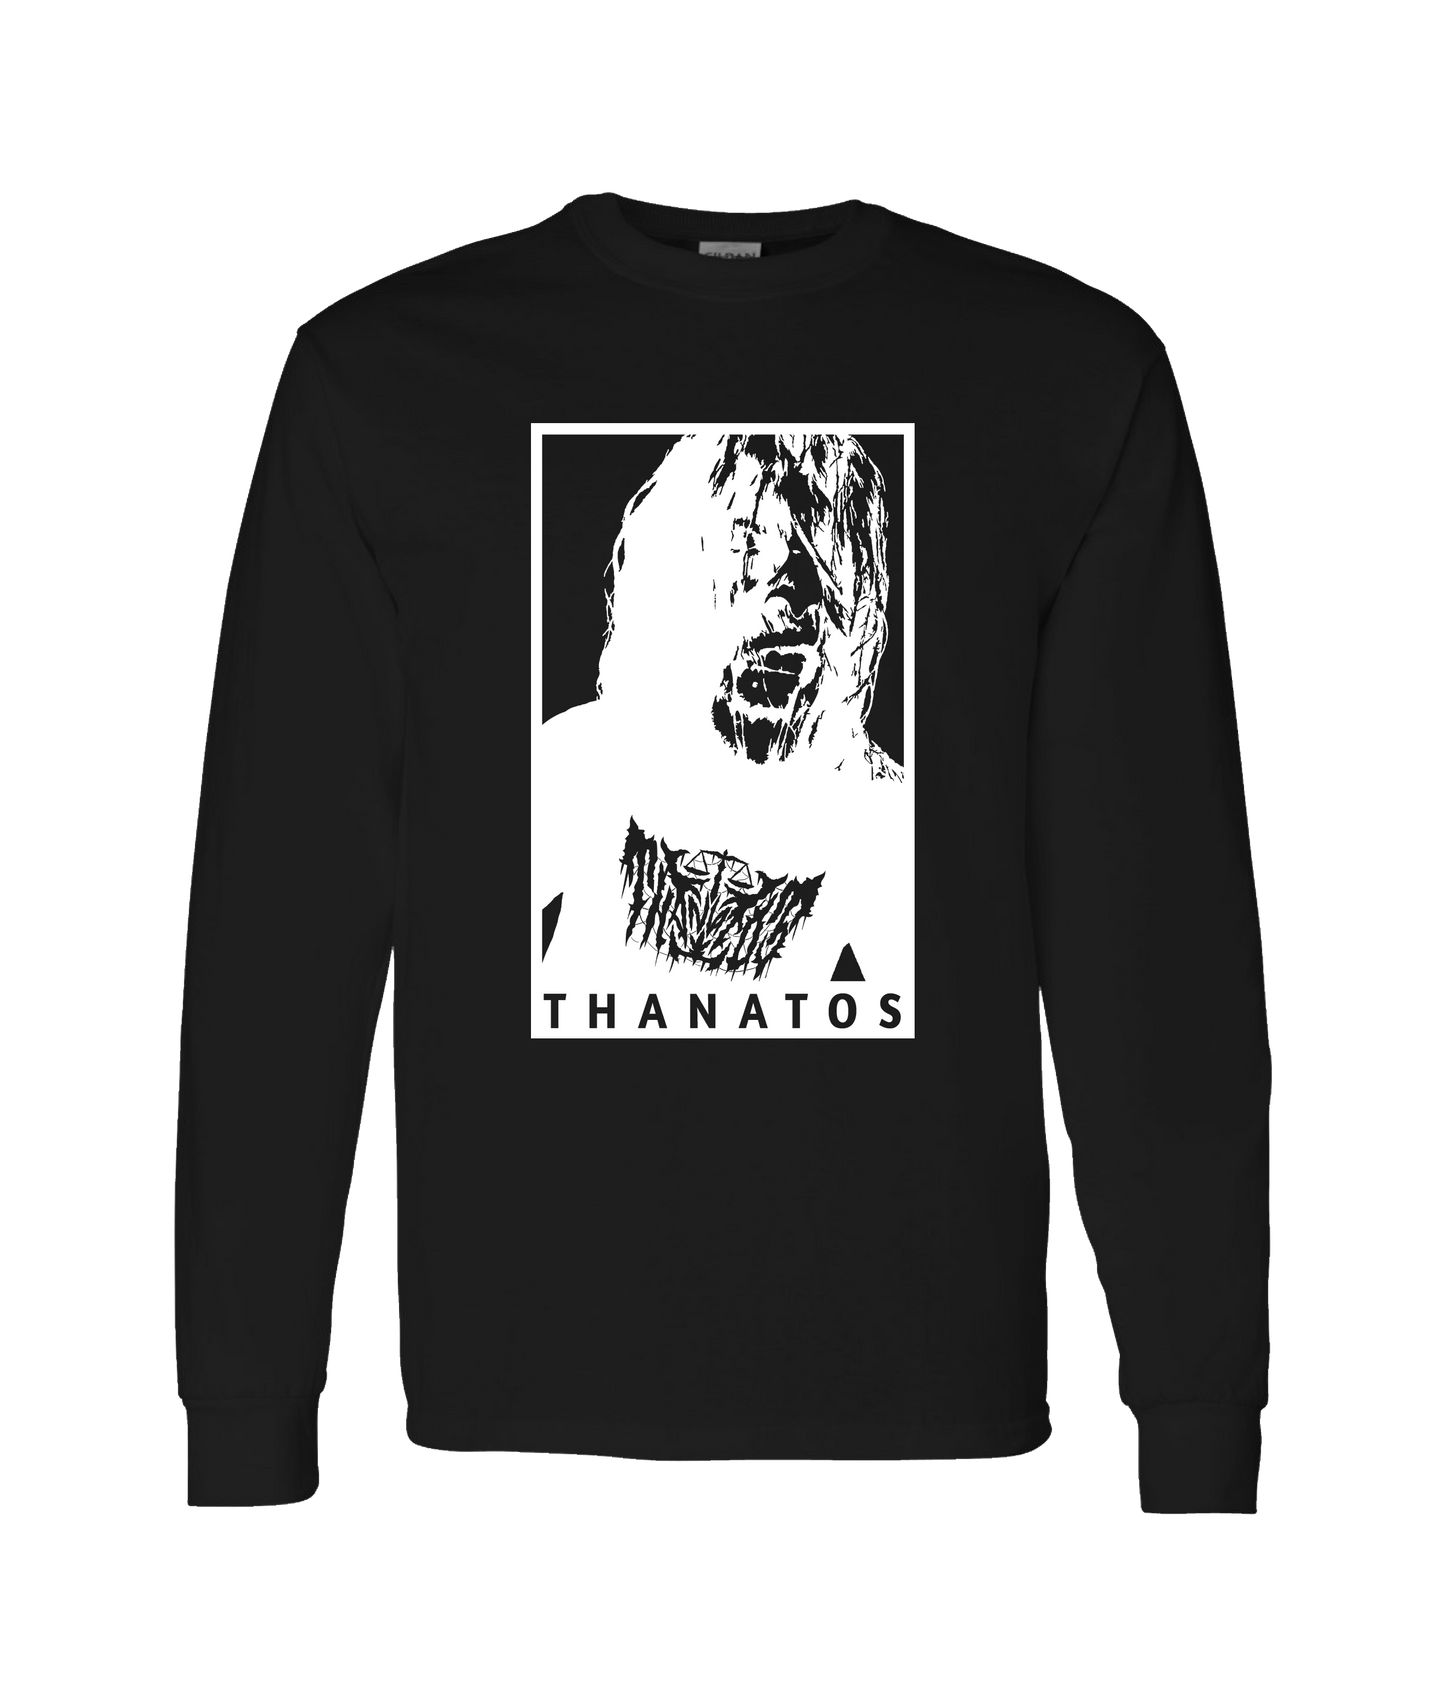 Thanatos - Better the Devil You Know Than the One You Don't - Black Long Sleeve T